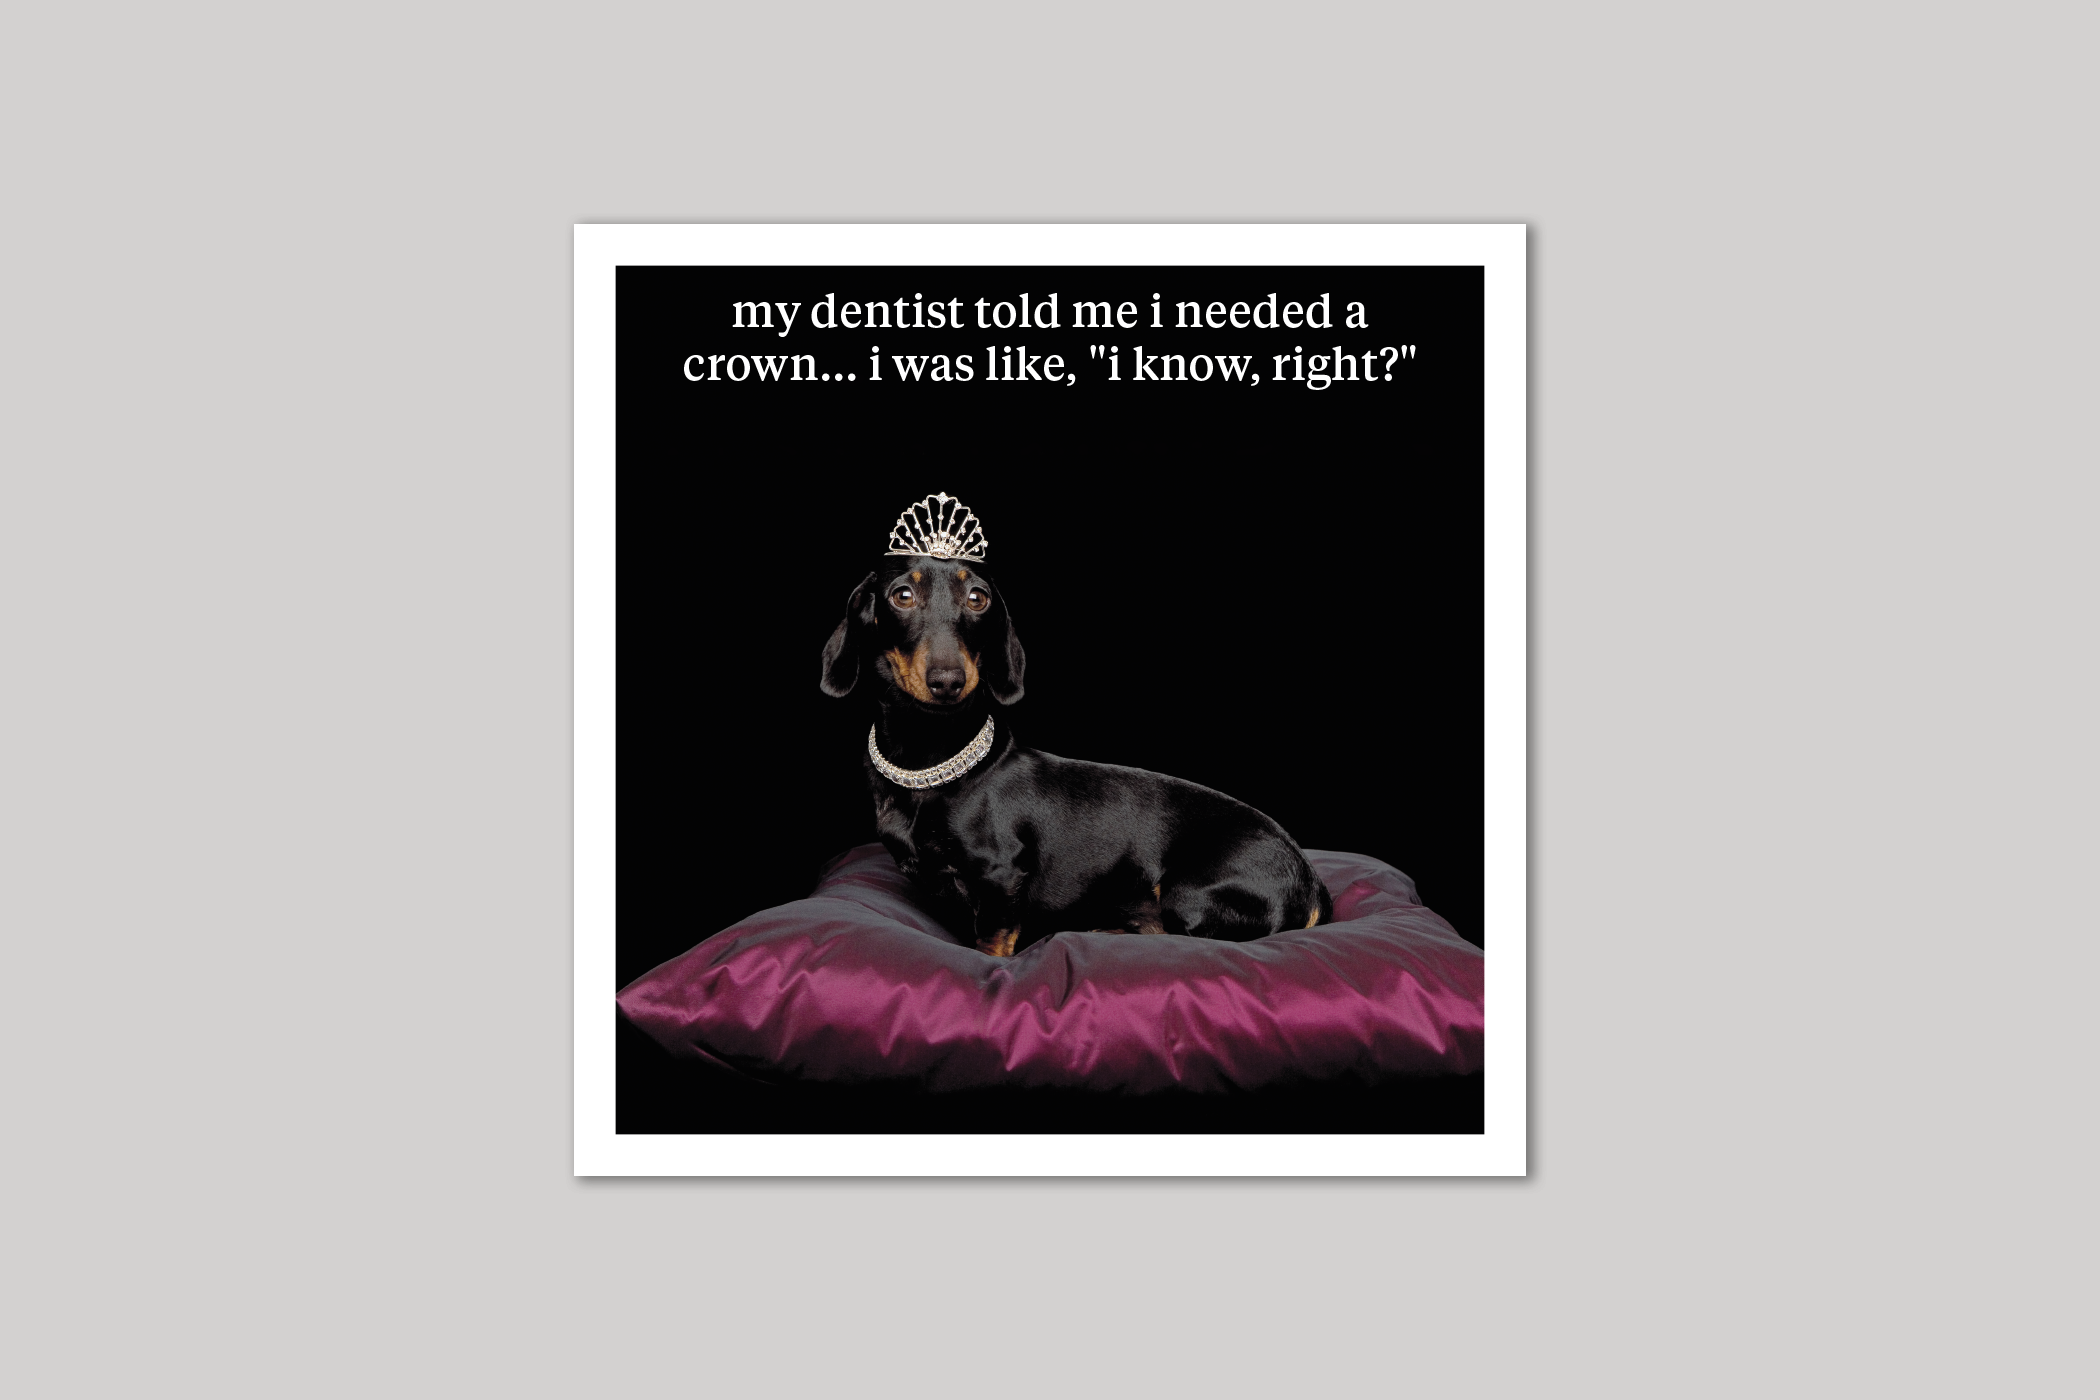 I Need A Crown quirky animal portrait from Curious World range of greeting cards by Icon.